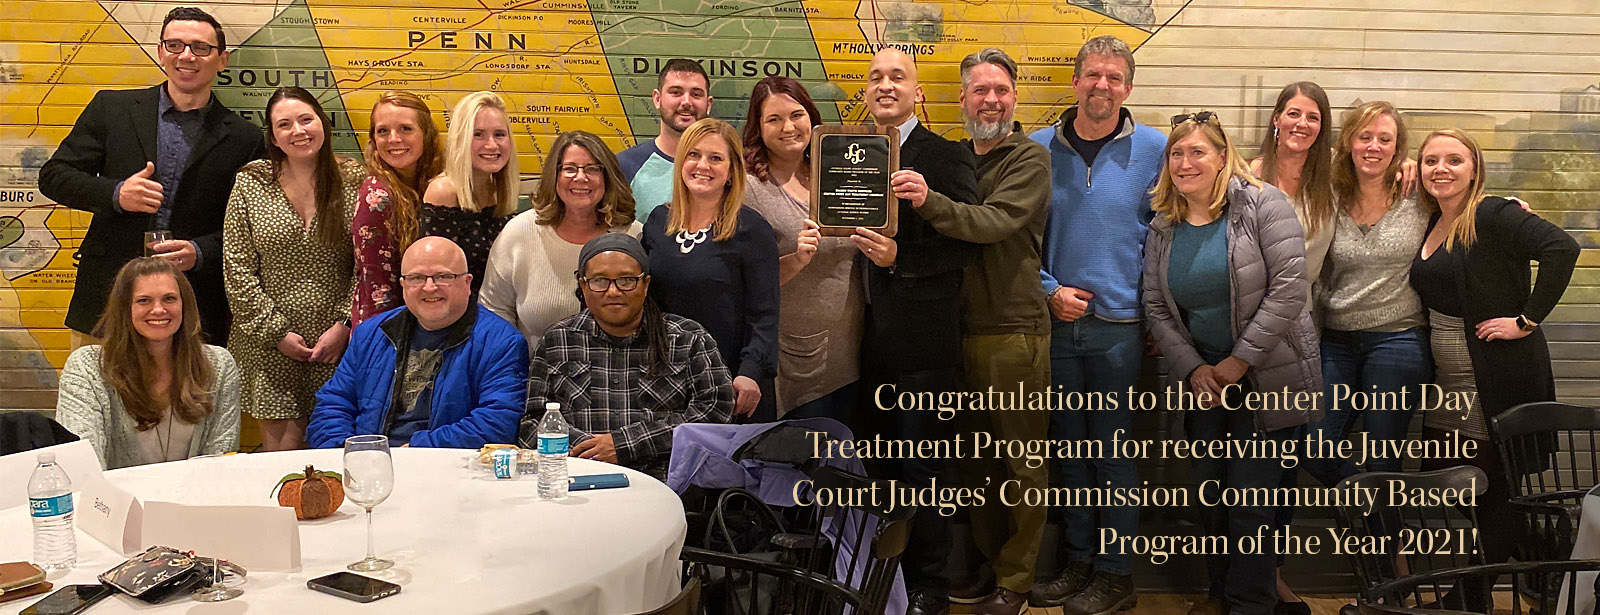 Congratulations to Center Point for Judge's Award.